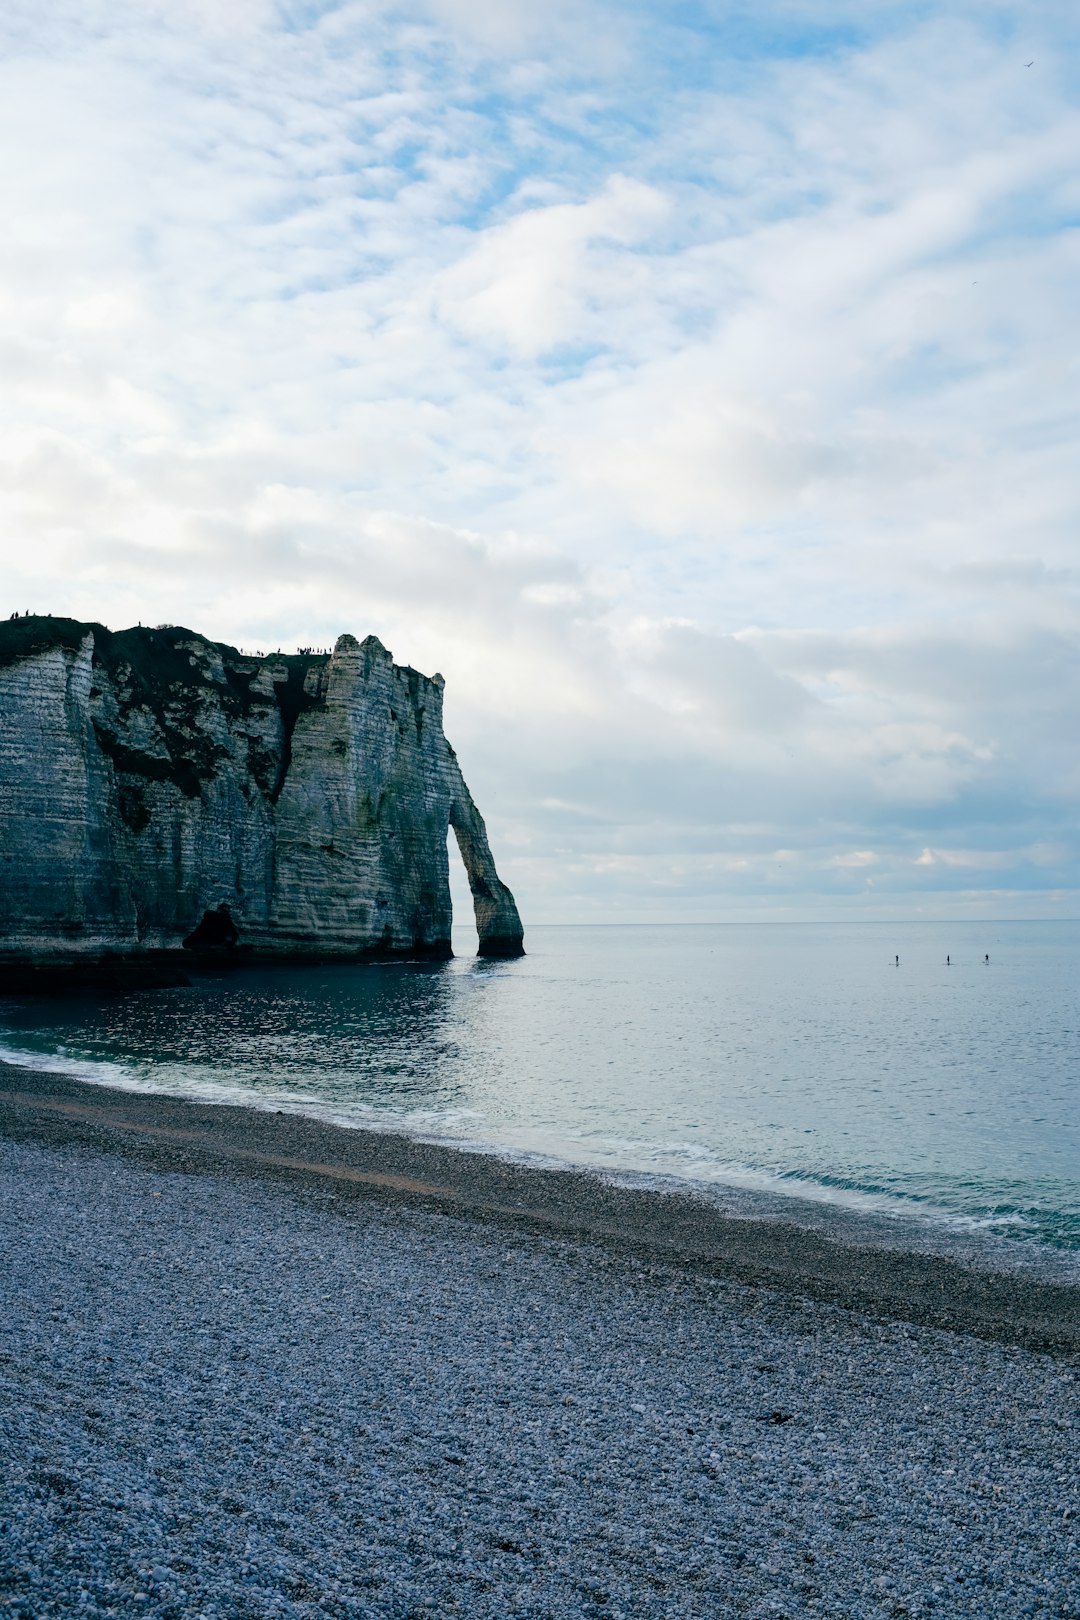 gray rock formation on sea shore under white clouds during daytime